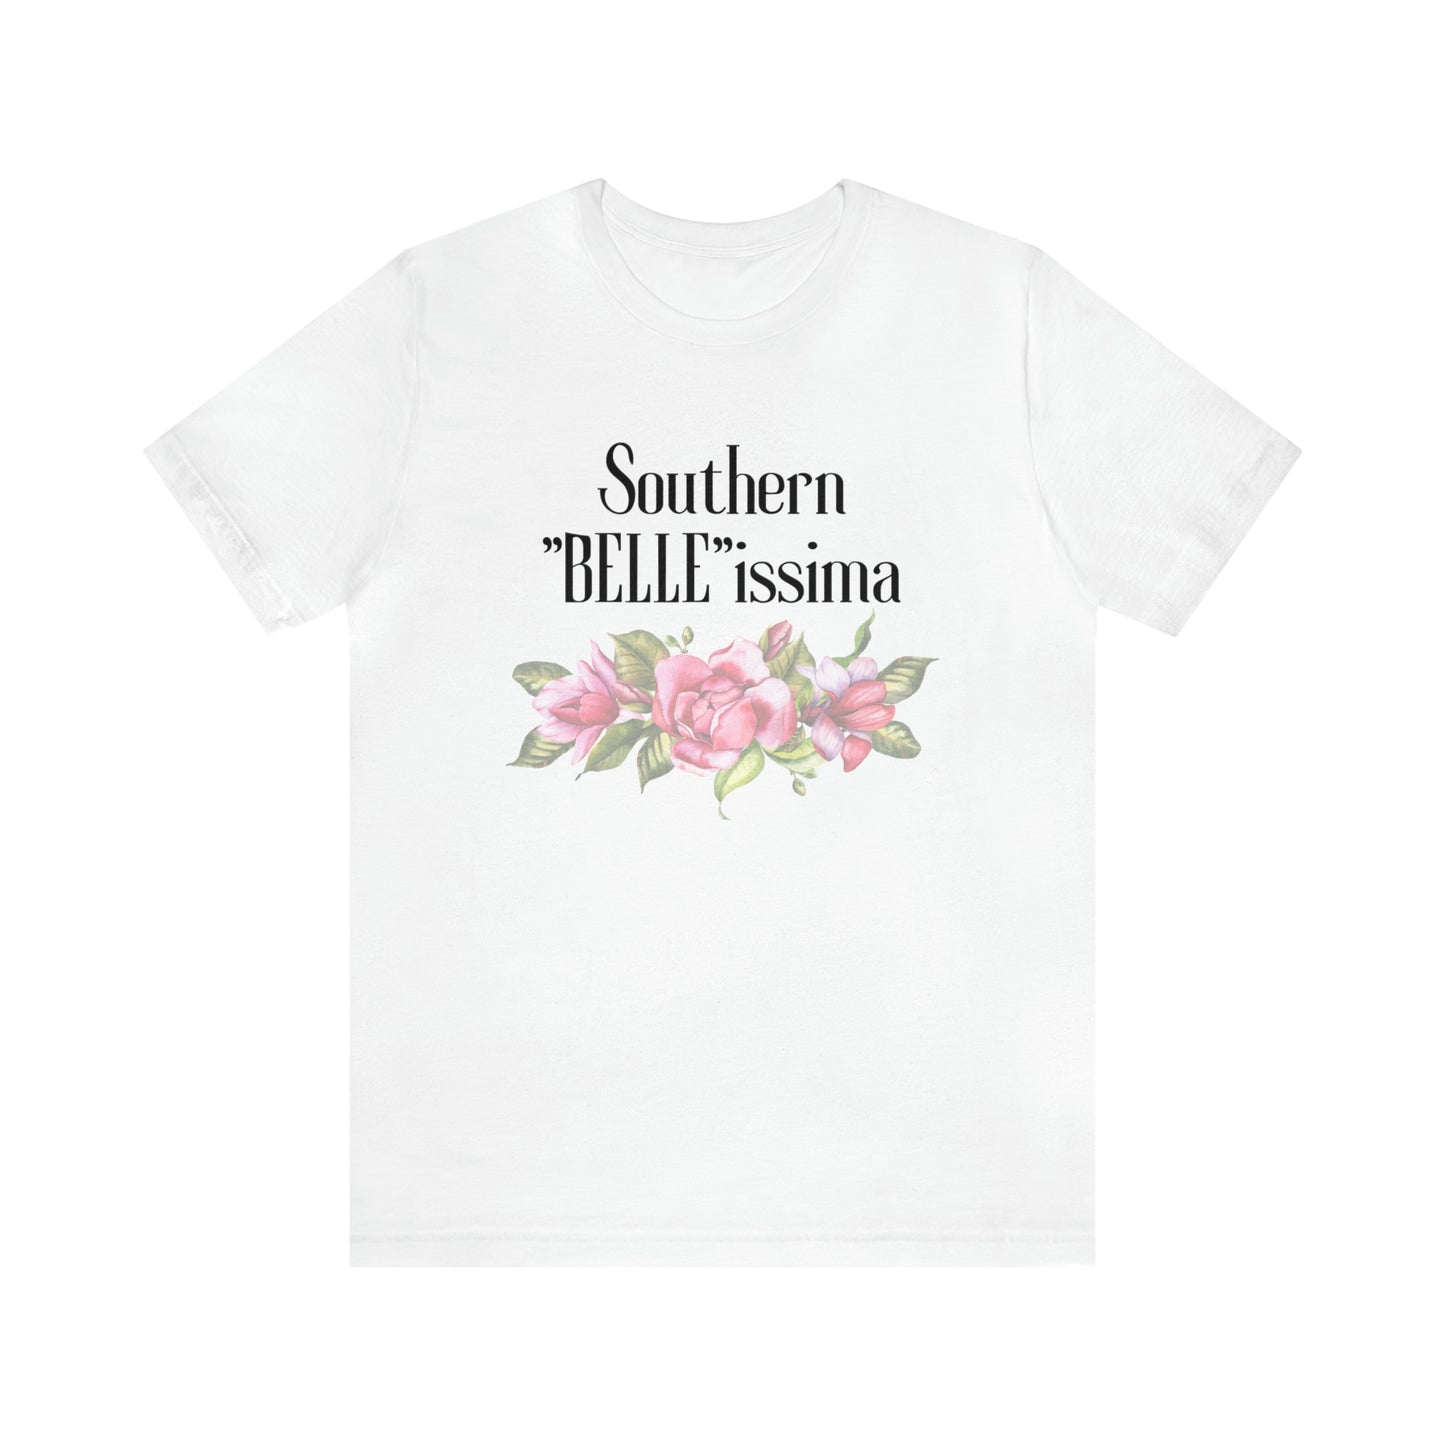 Southern "Belle"issima T-Shirt - Sweet Magnolias